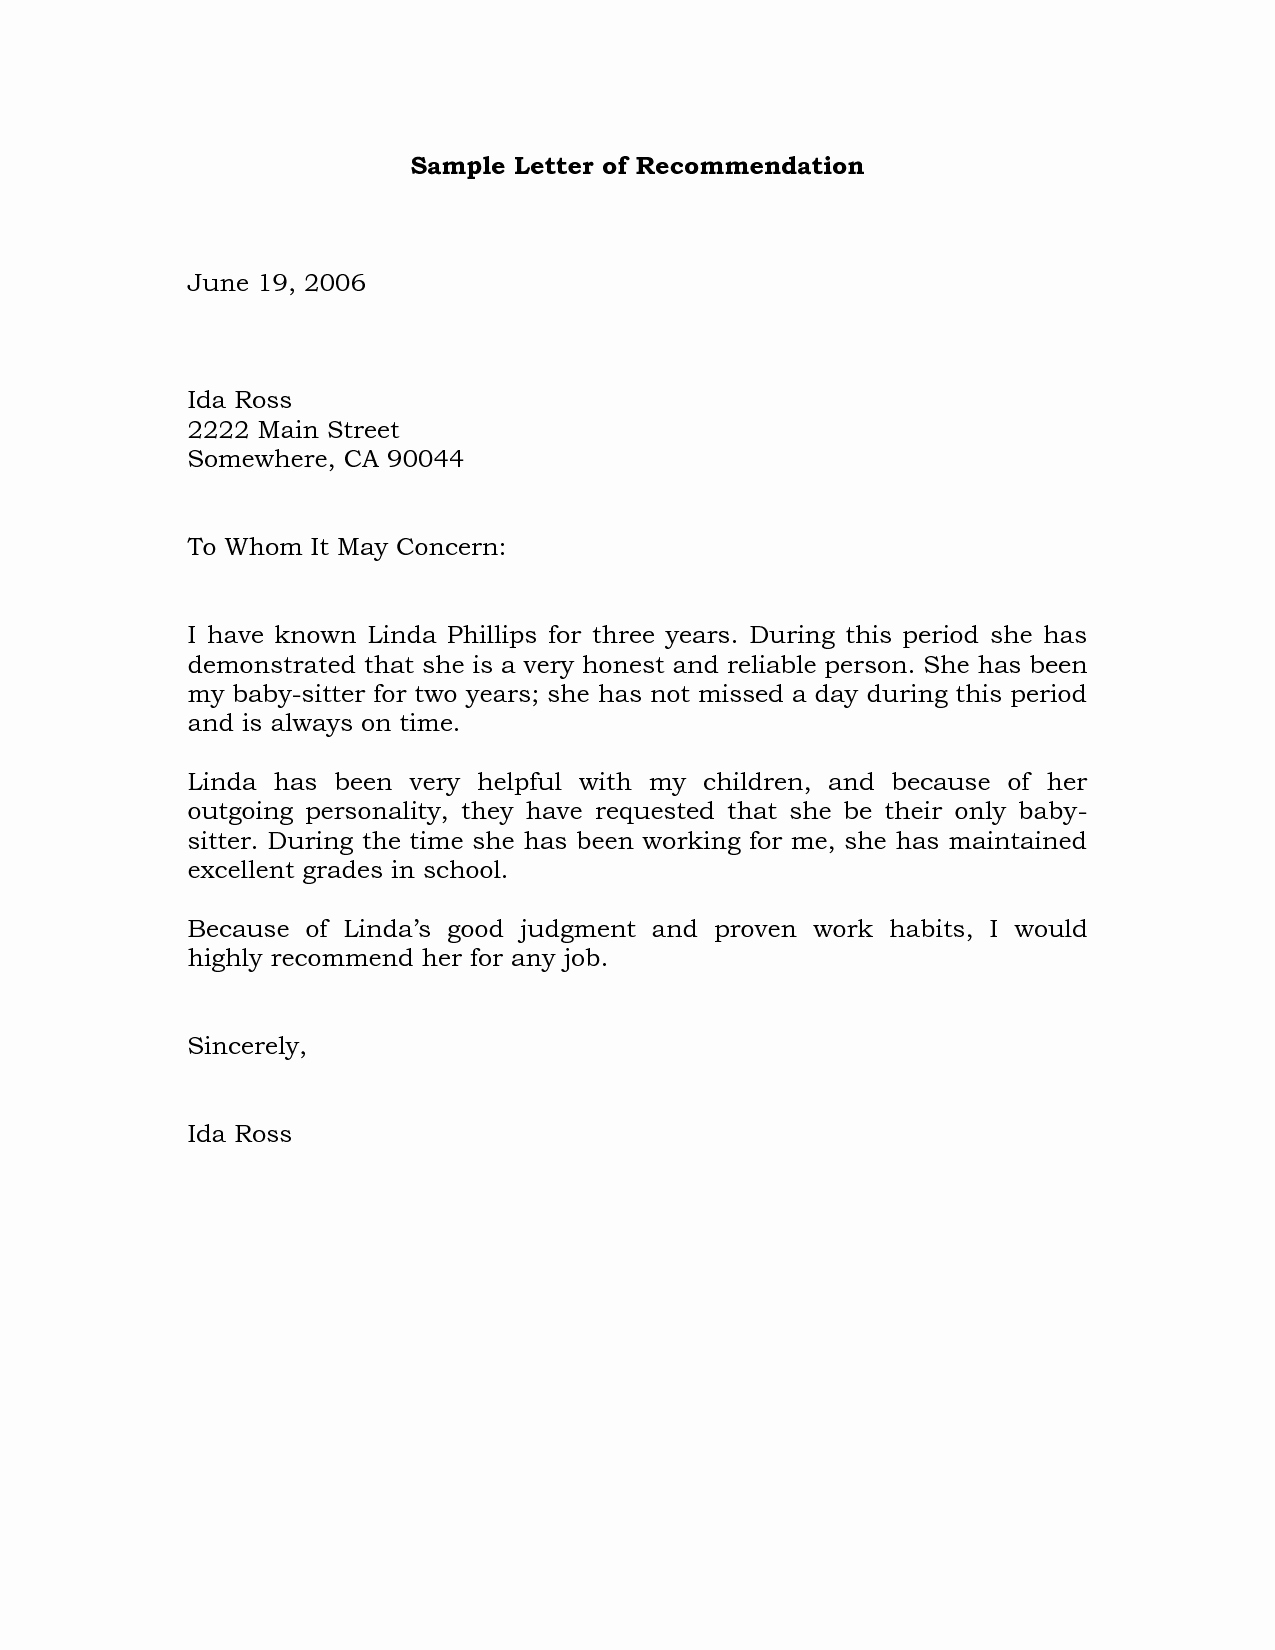 Sample Letters Of Recommendation Employee Beautiful Sample Re Mendation Letter Example